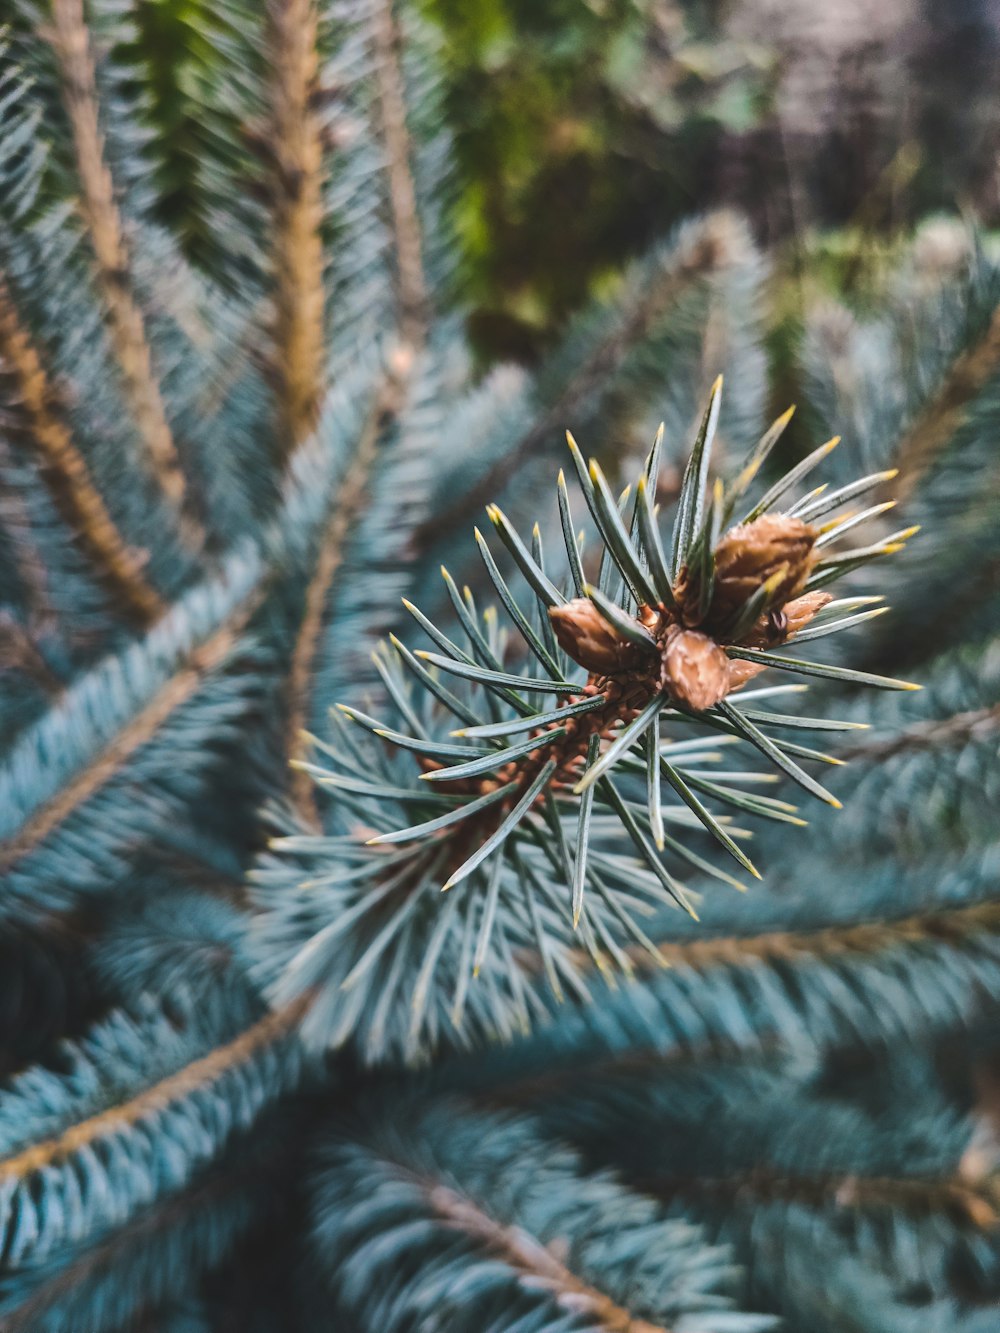 brown pine cone in close up photography photo – Free Baku Image on Unsplash